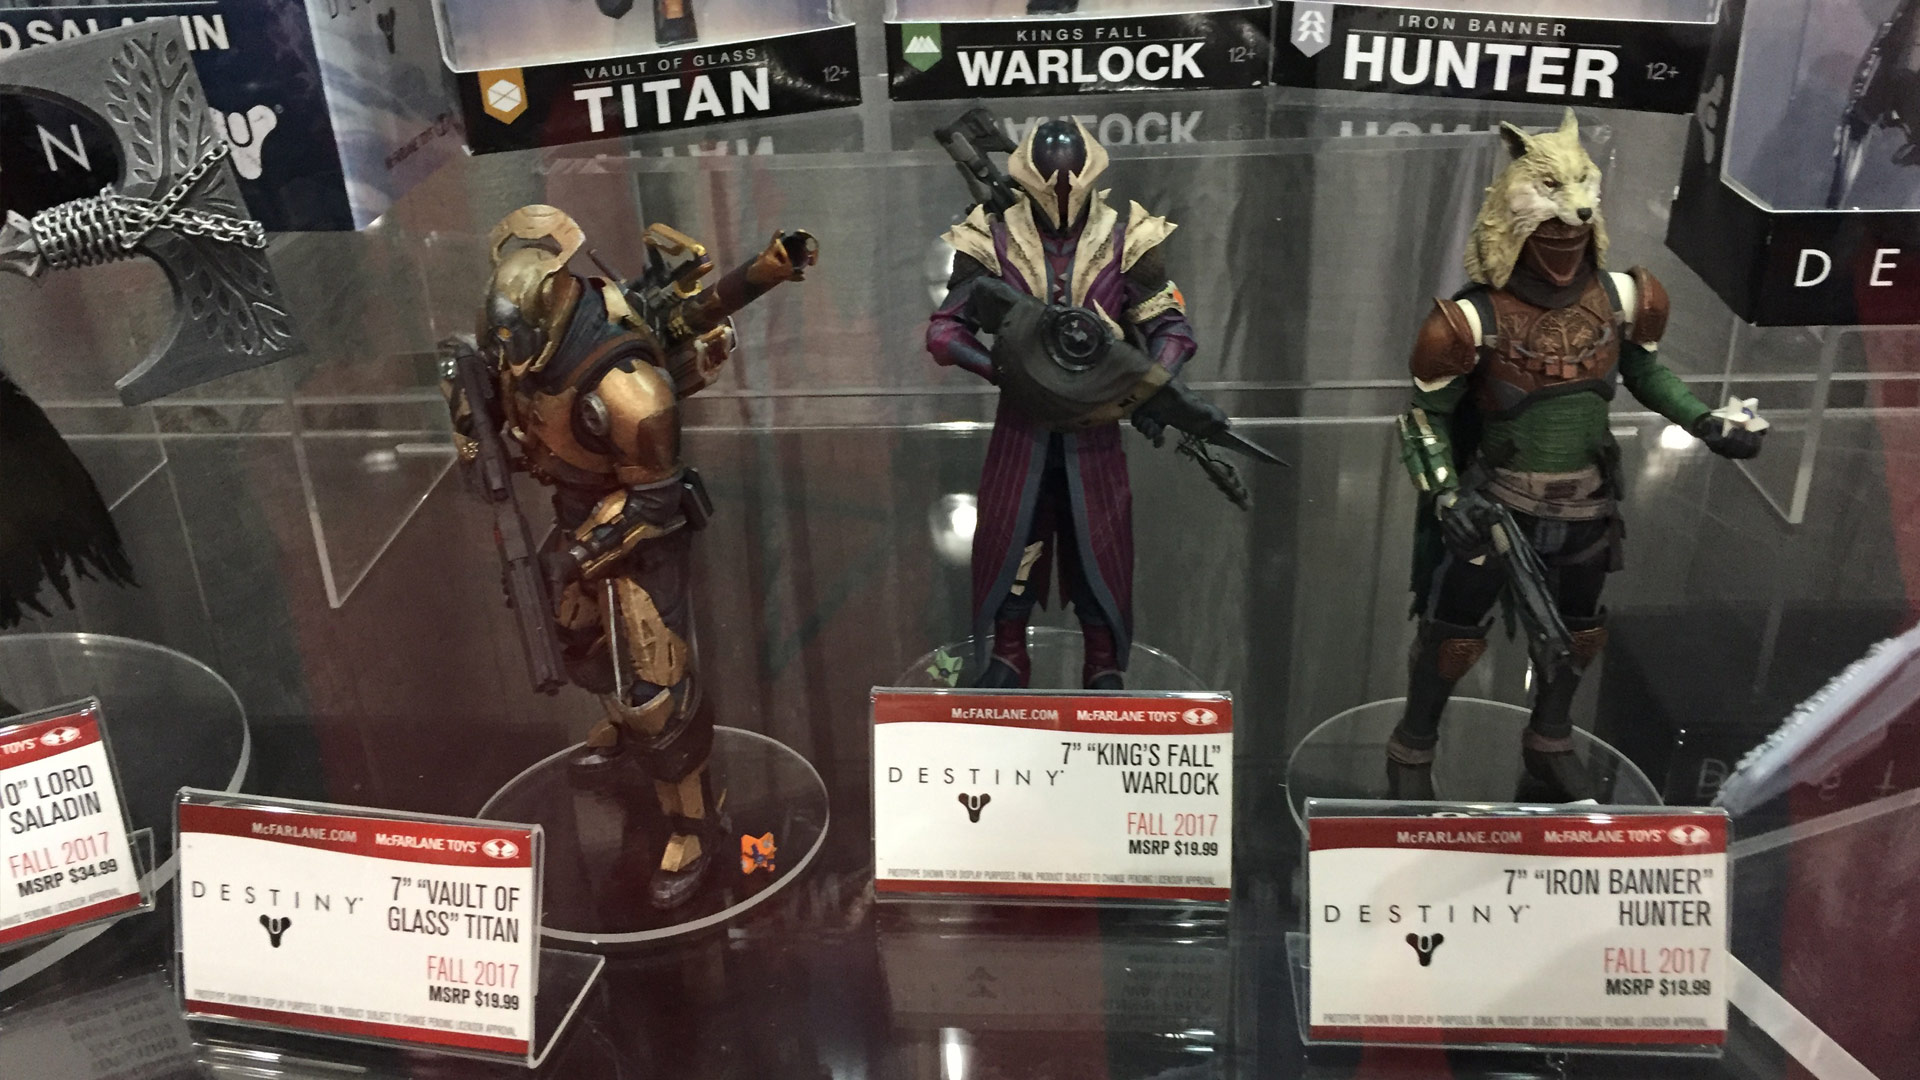 Destiny 2017 Figures at Toy Fair 2017 featuring Titan, Warlock and Hunter